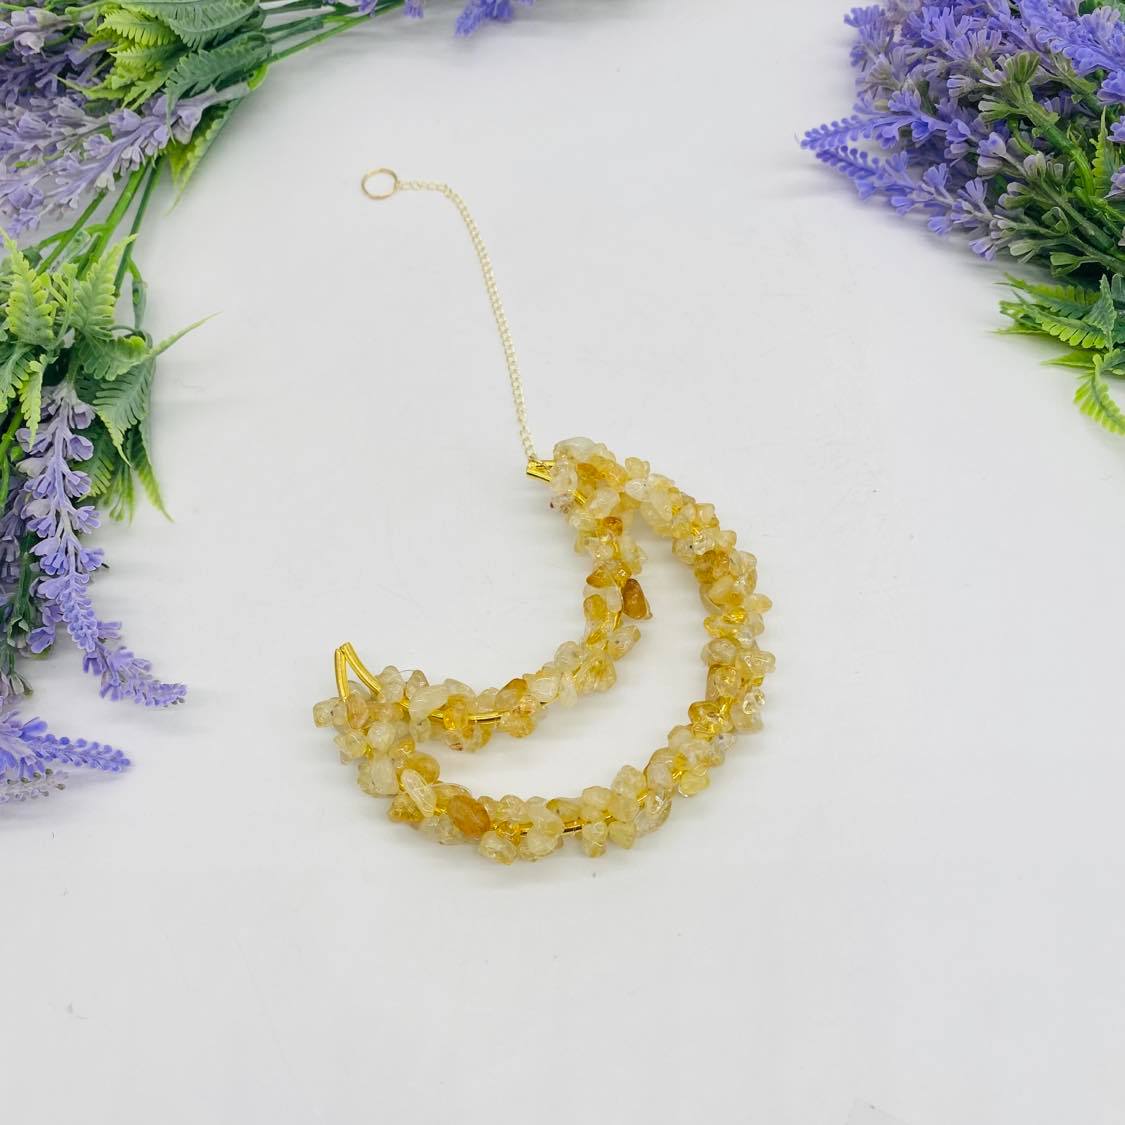 Crystal Hanging, Citrine Wall Hanging, Crescent Moon Hanging, Handmade Decor, Wall Decor,  Gift For Her, Unique Room Decor